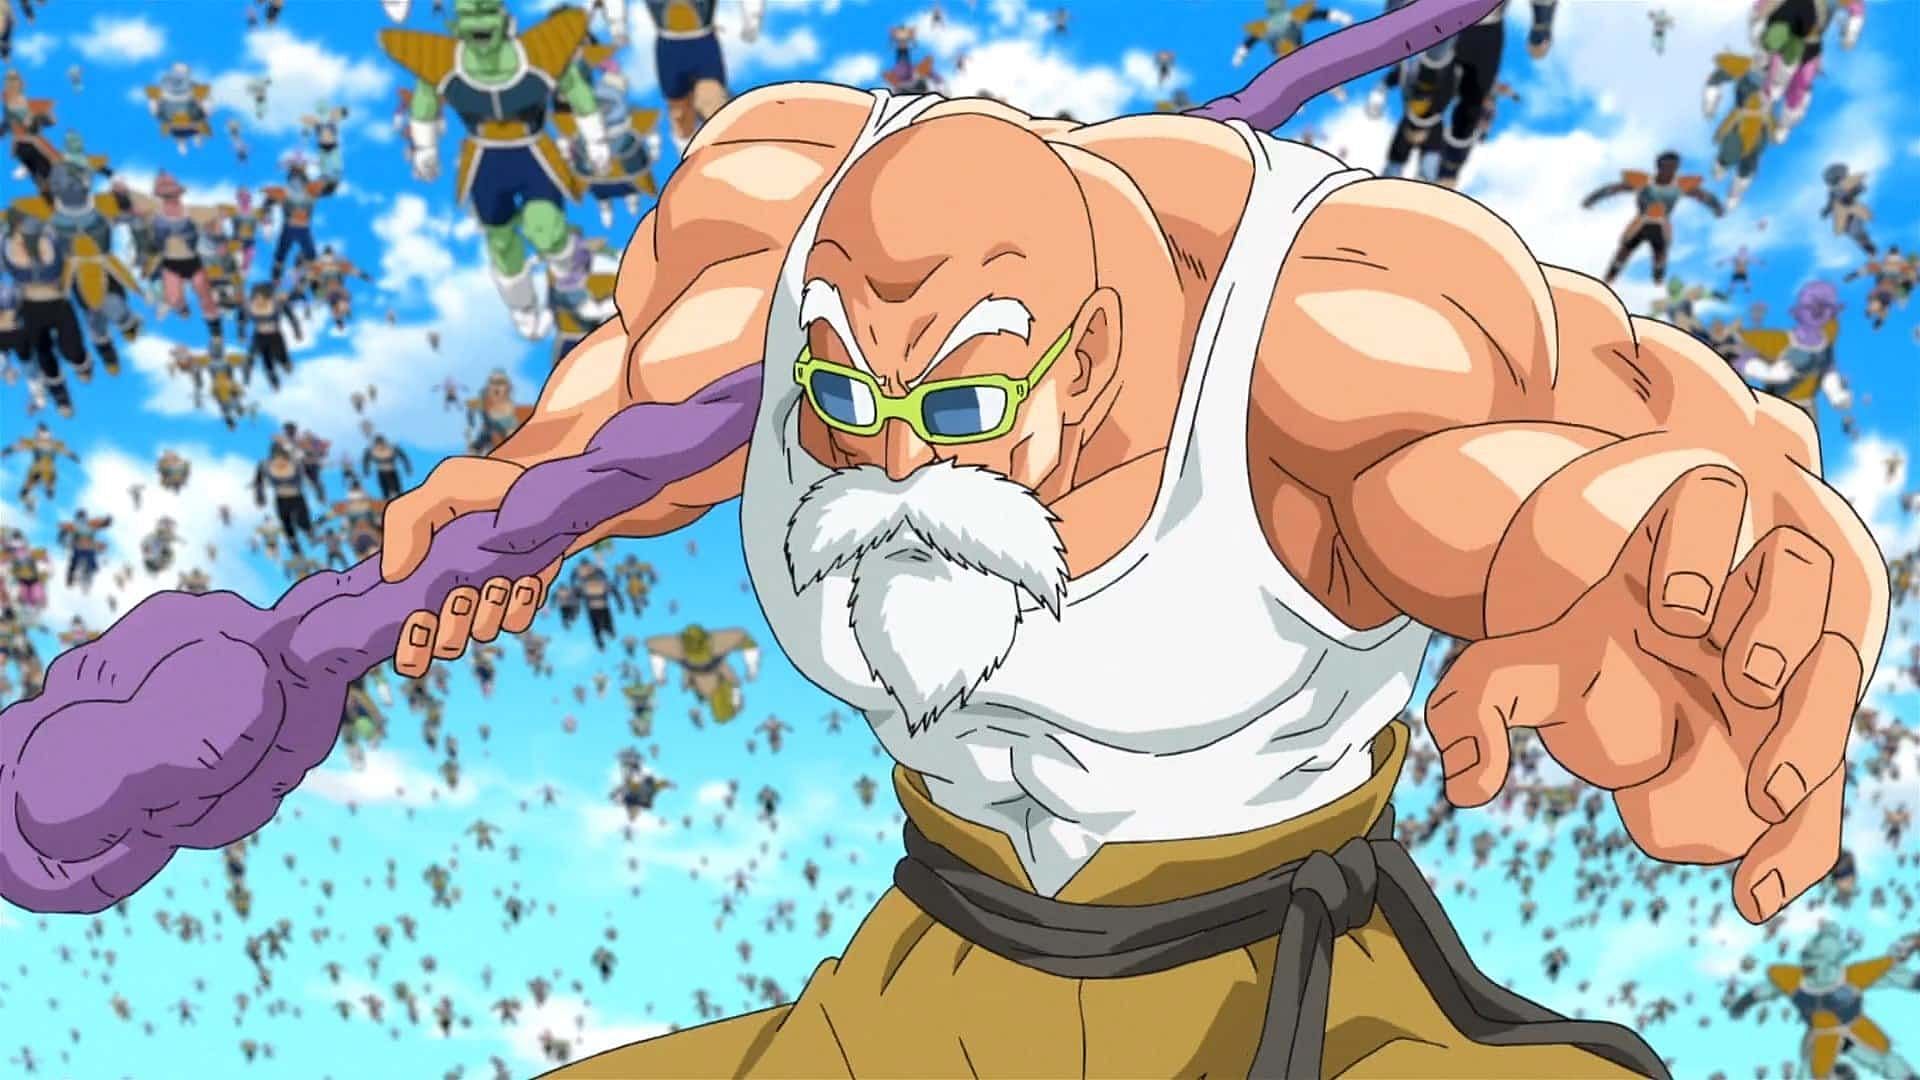 Master Roshi as seen in Dragon Ball Super (Image via Toei Animation)